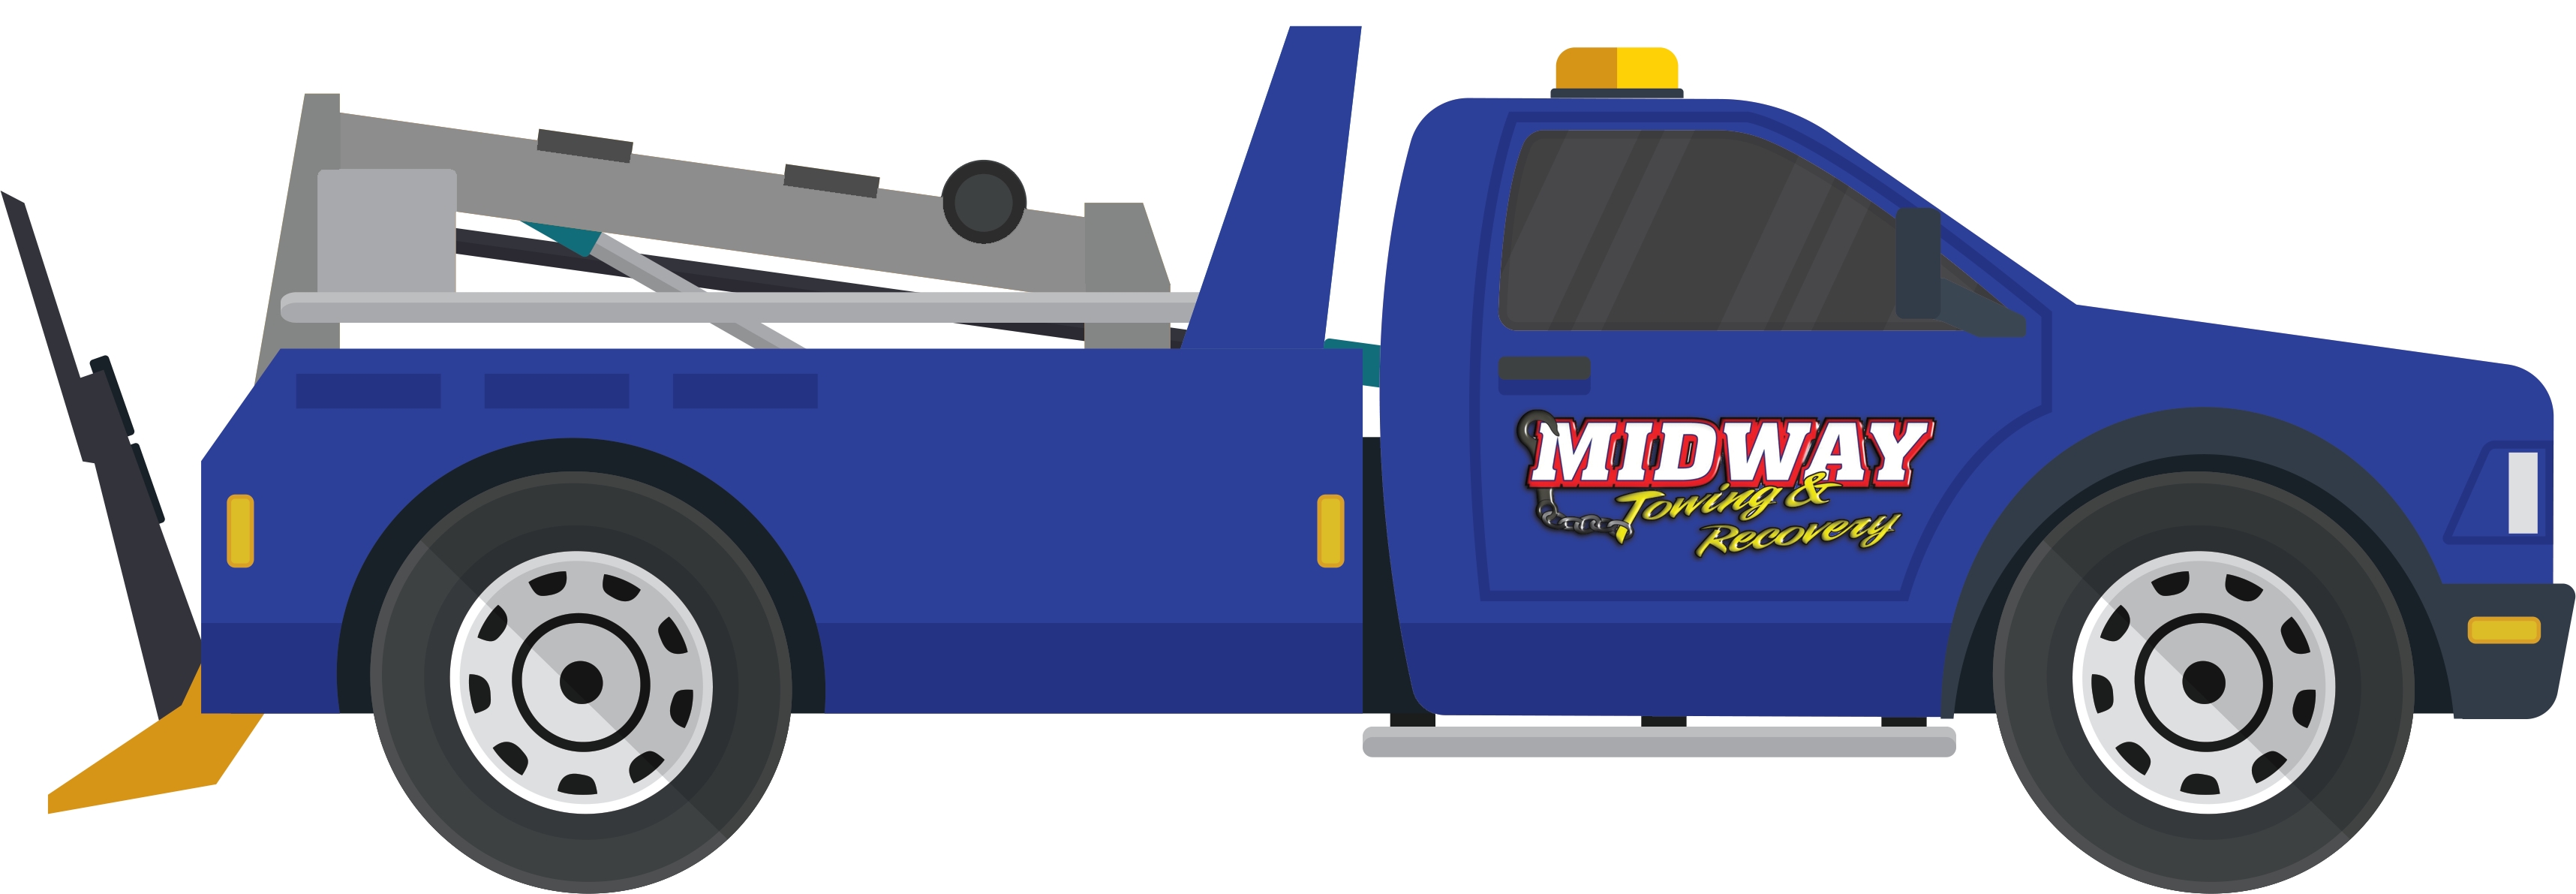 Midway Towing & Recovery stands ready to help you whenever 24 hour towing in the Richmond, Virginia area is needed.